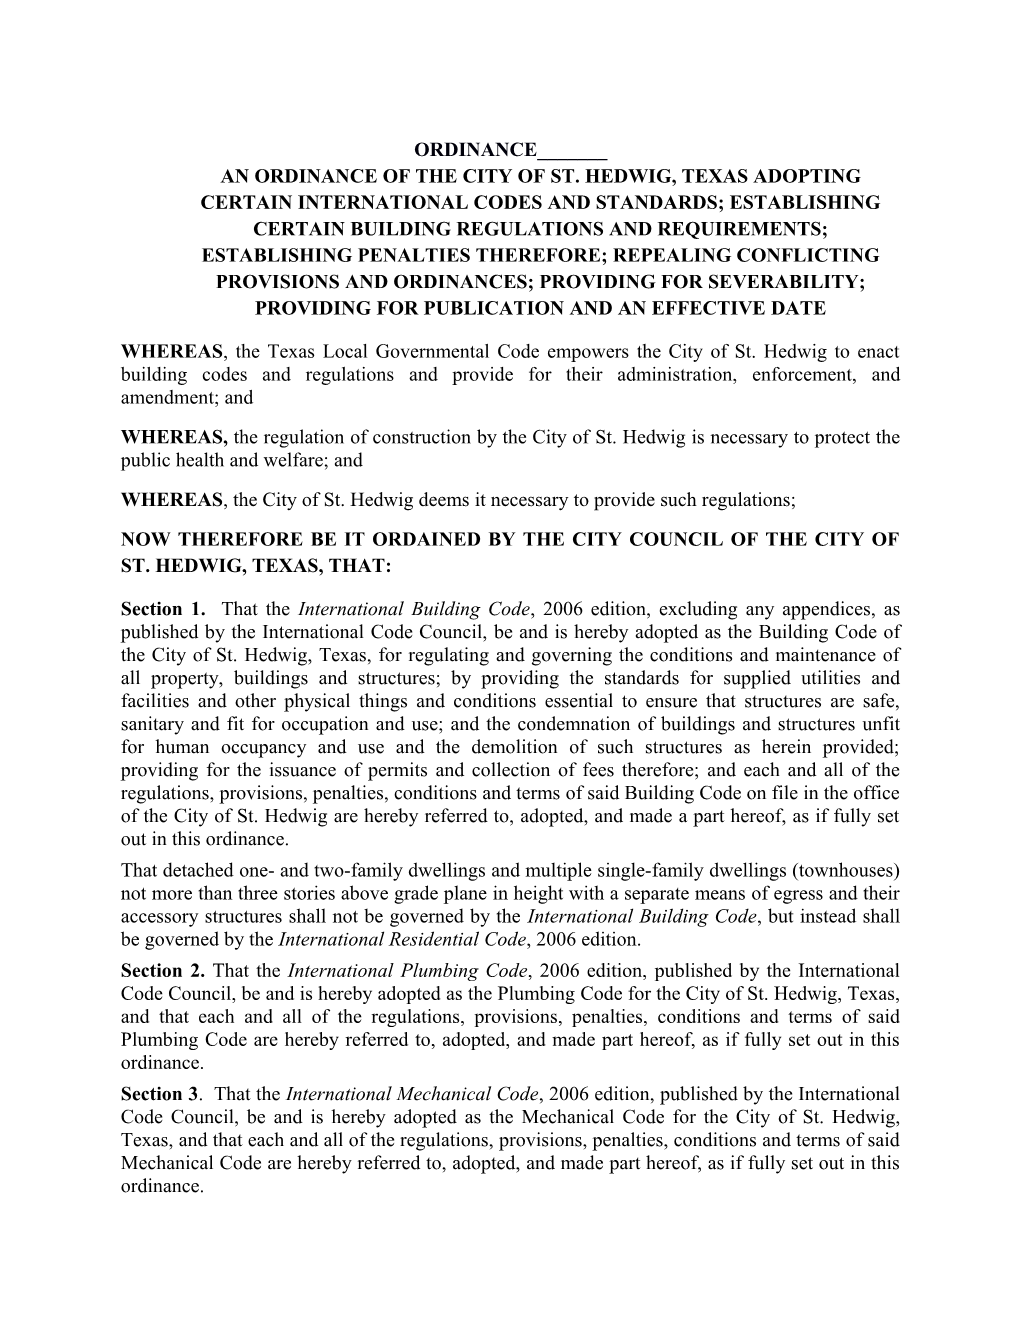 An Ordinance of the City of St. Hedwig, Texas Adoptingcertain International Codes And